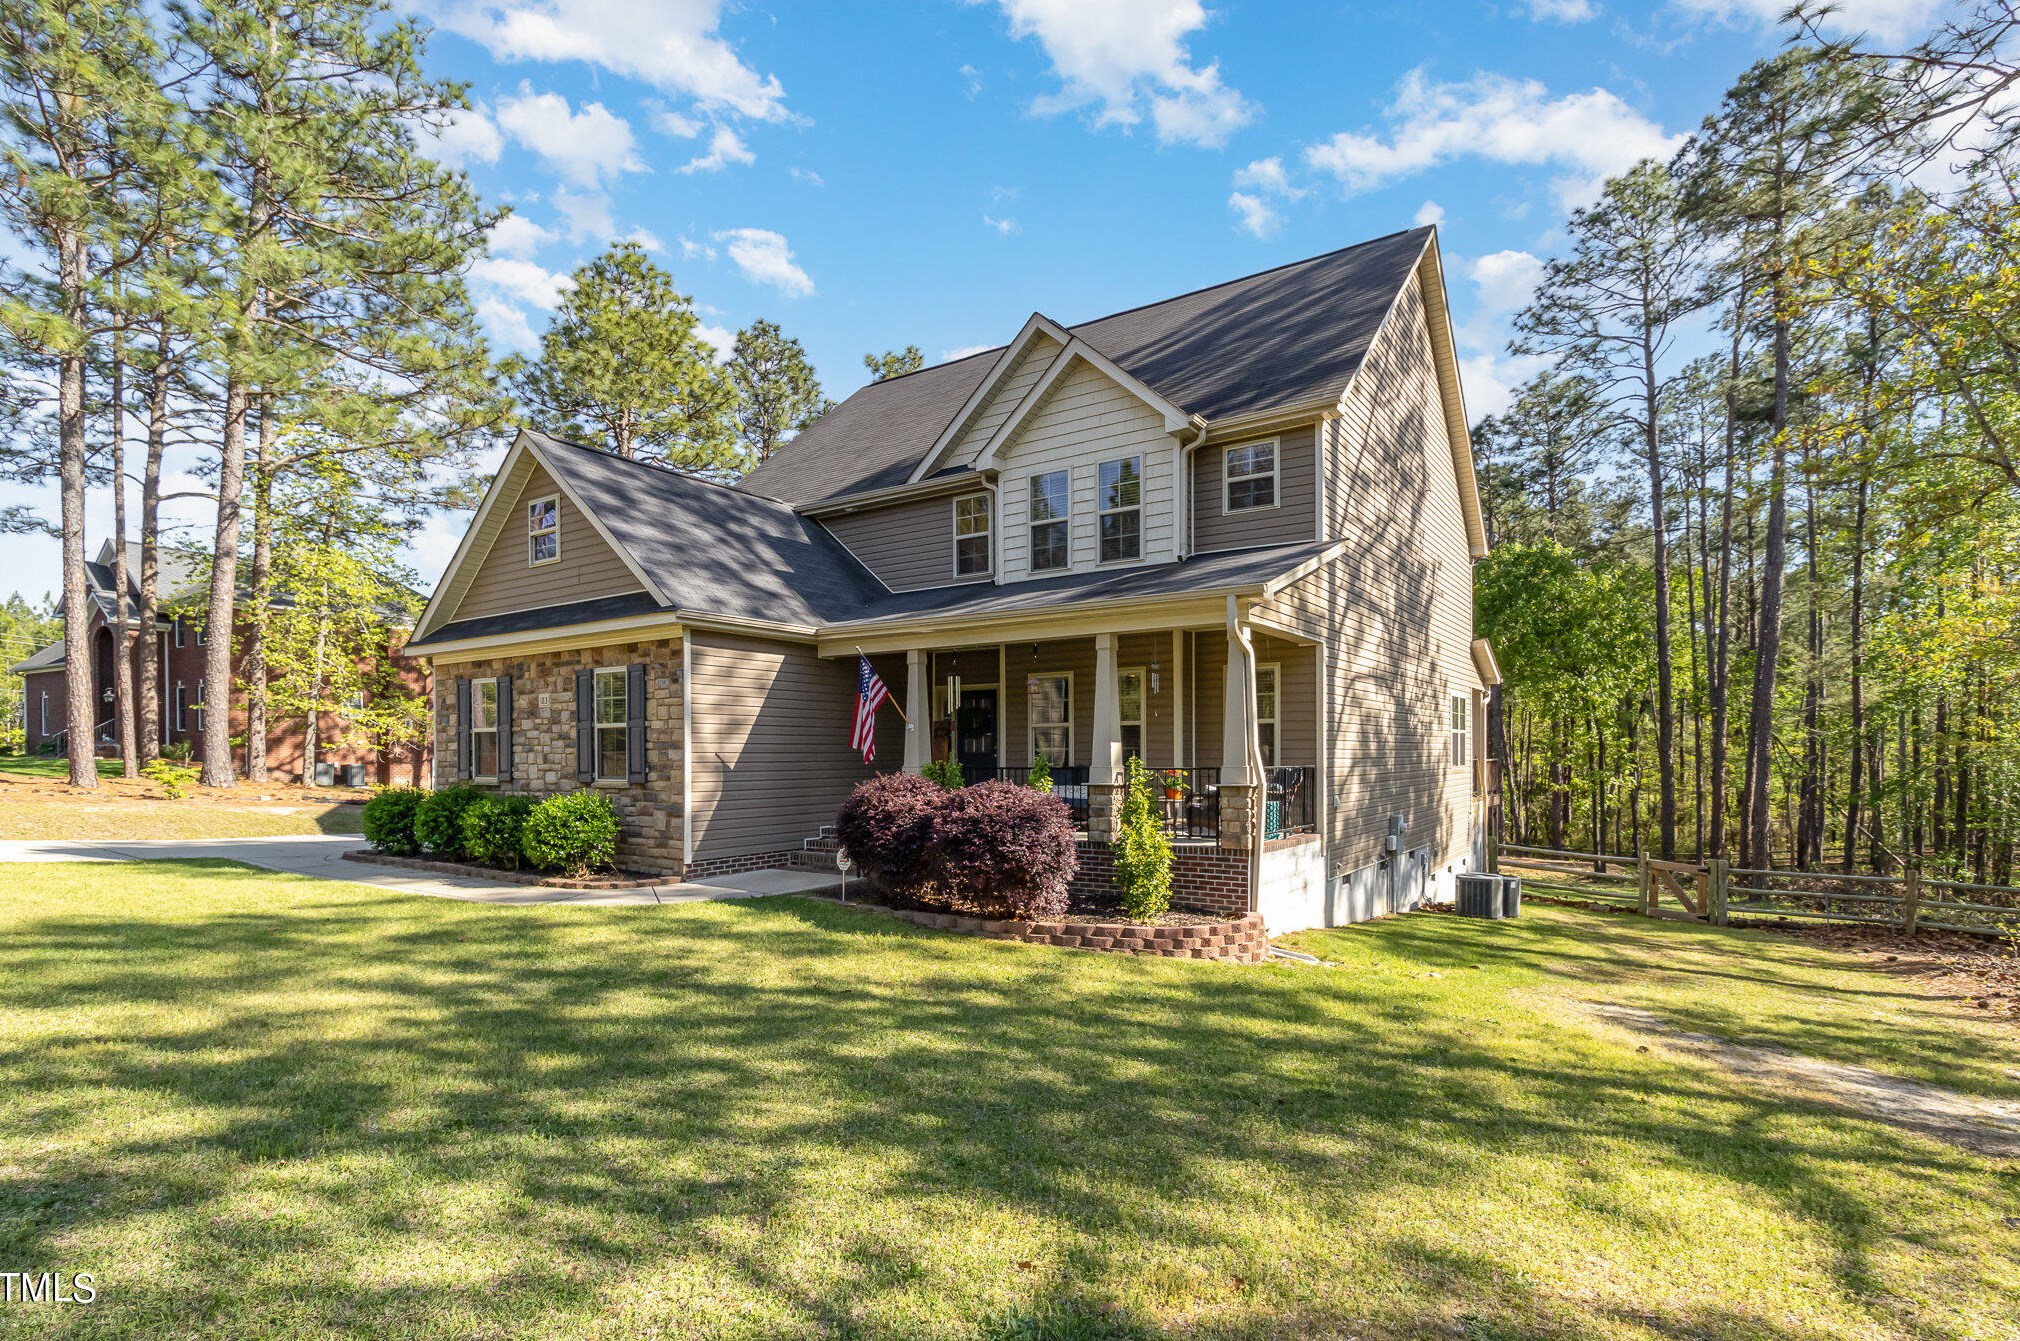 183 Pinetop Dr, Whispering Pines, NC 28327